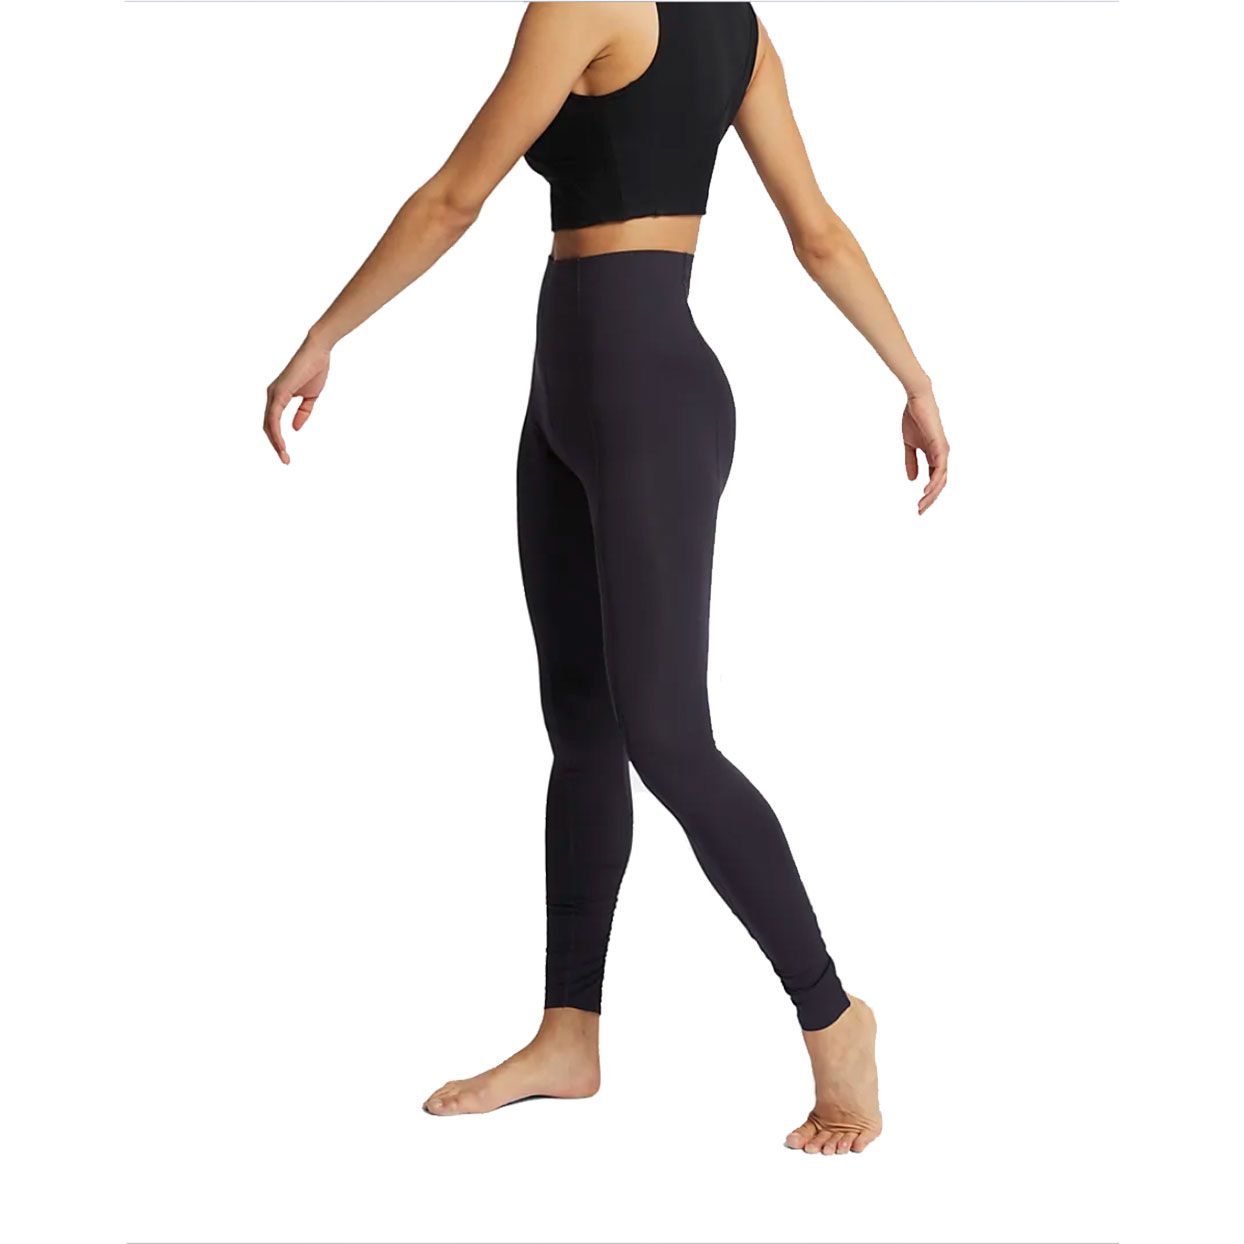 Forthery Workout Clothes for Women High Waisted Leggings Yoga Pants Seamless Jacquard Point Hollow Pants Tummy Control